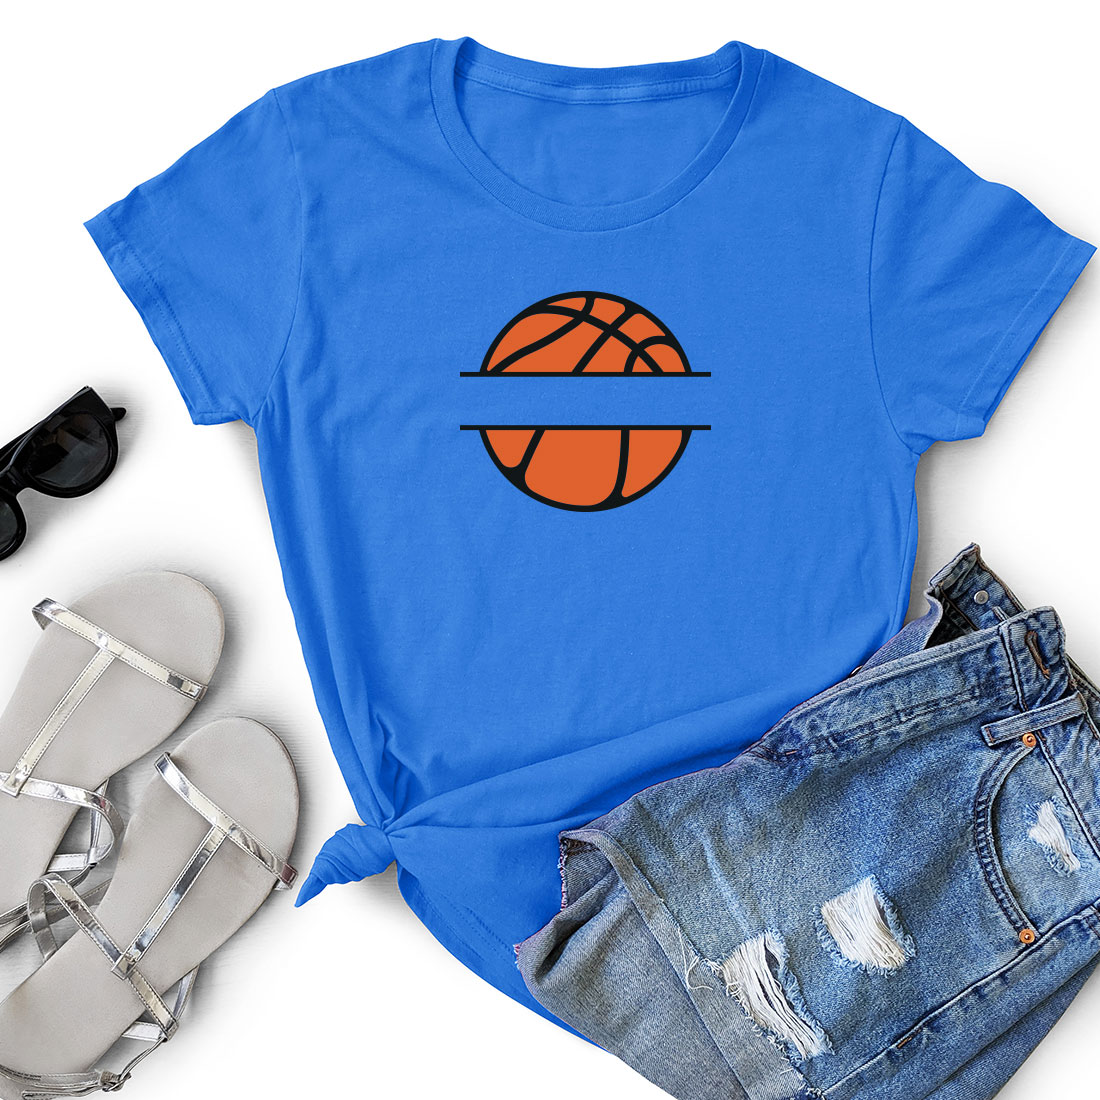 T - shirt that has a basketball on it.